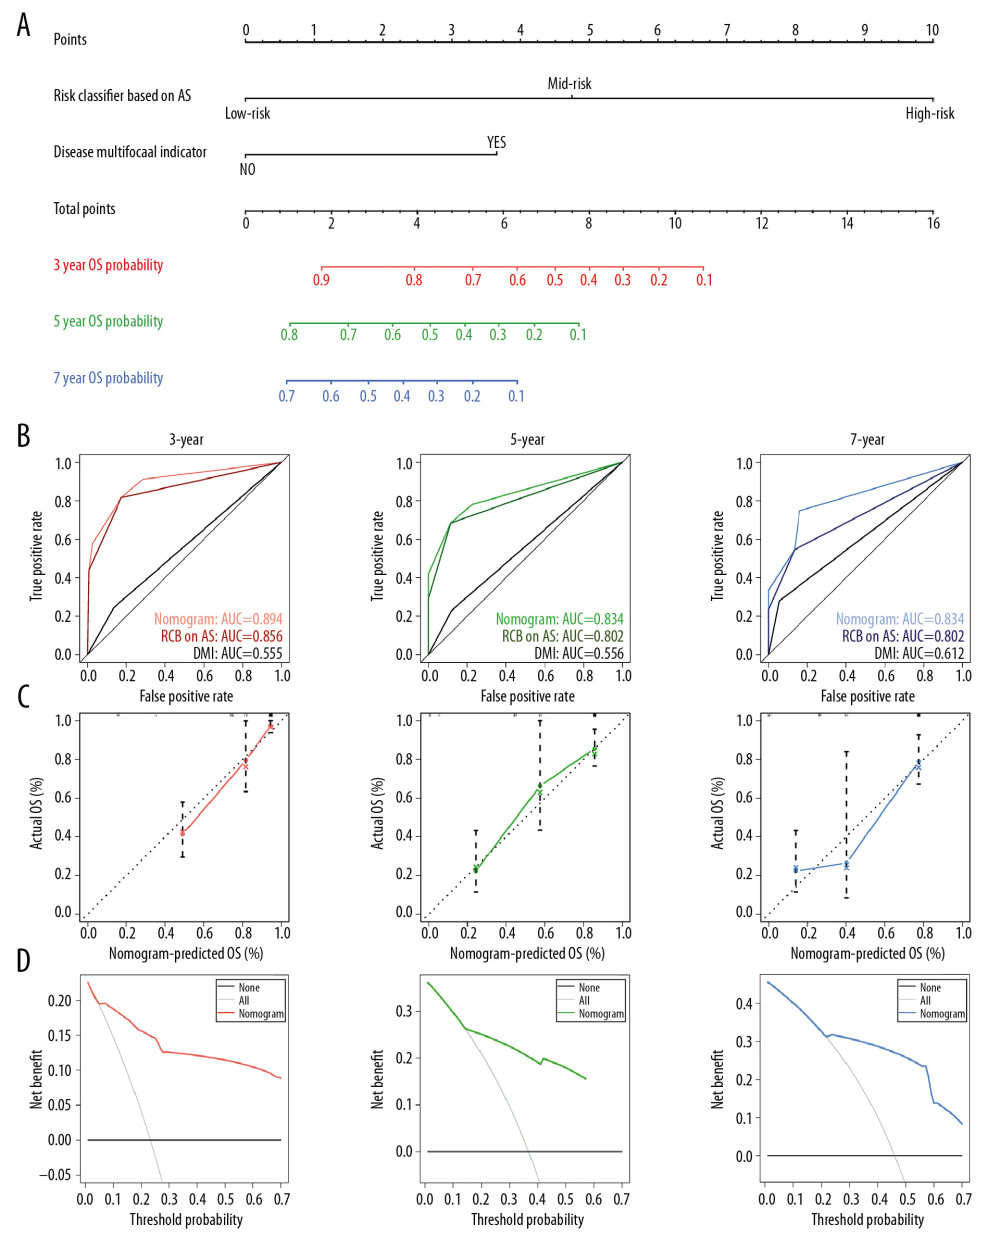 The nomograms and corresponding results showed the prognostic value of AS events and clinicopathologic data. (A) Nomogram for predicting OS in the SARC cohort. (B) Time-dependent ROC curves for 3- (red), 5- (green), and 7- (blue) year OS. (C) Calibration plot of the AS-clinicopathologic nomogram in terms of the agreement between nomogram-predicted and observed 3- (red), 5- (green), and 7- (blue) year OS in the SARC cohort. (D) Decision curve analysis of the AS-clinicopathologic nomogram for 3- (red), 5- (green), and 7- (blue) year risk in the SARC cohort. AS – alternative splicing; OS – overall survival; SARC – sarcoma; ROC – receiver operating characteristic.